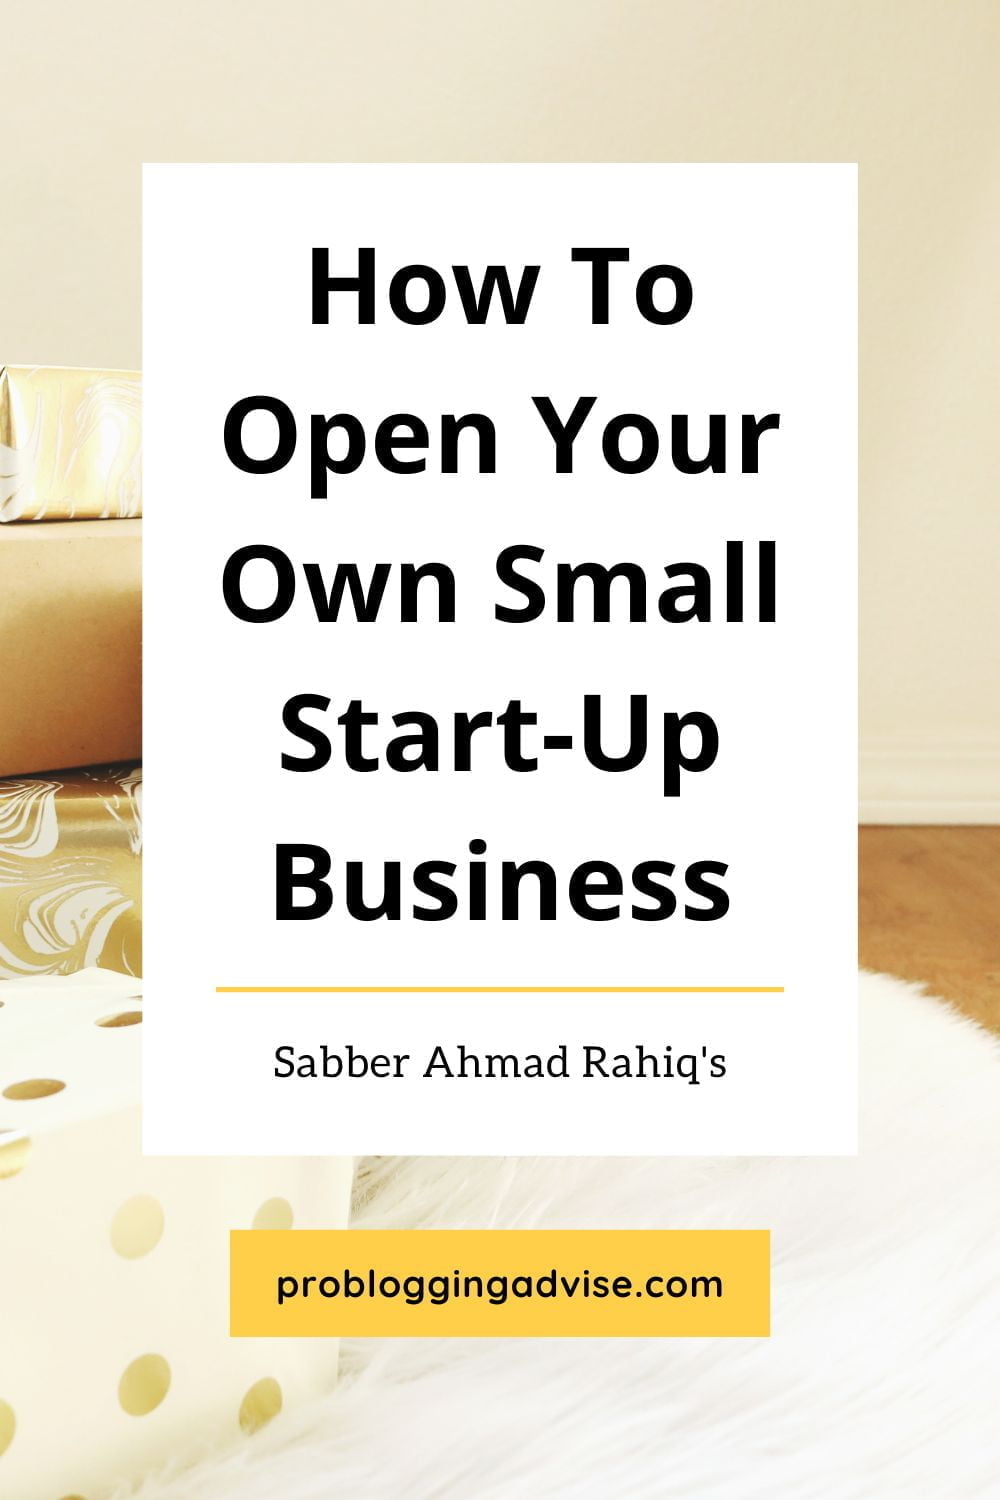 How To Open Your Own Small Start-Up Business